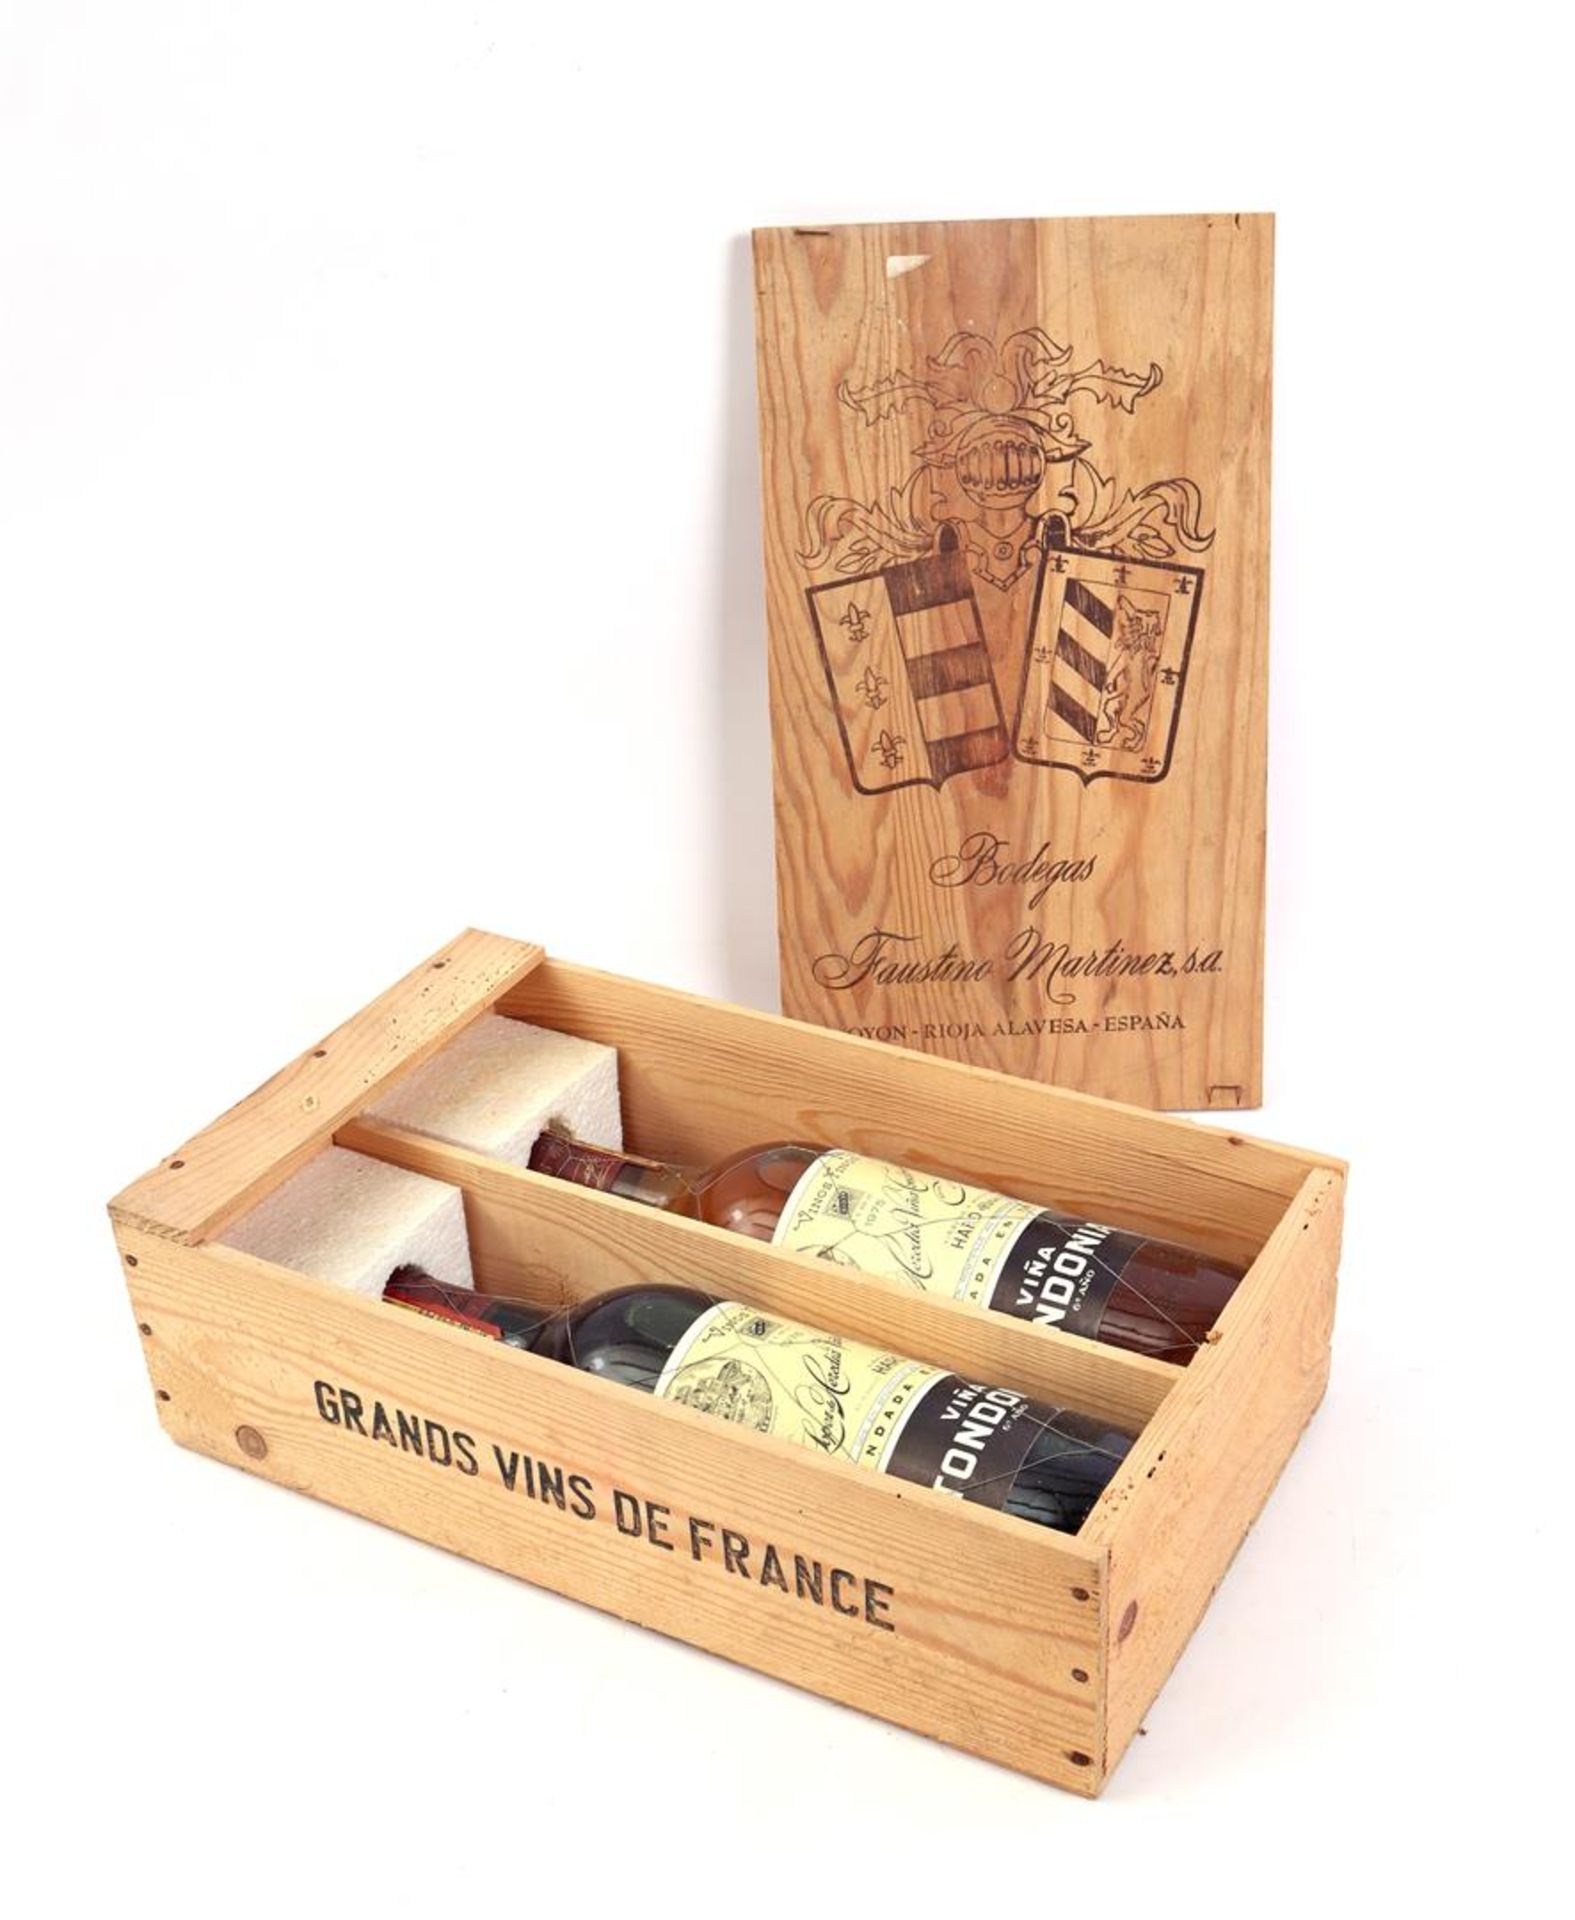 Bottle of red and white wine in wooden box; R. Lopez de Heredia Vina Tondonia, 1975 and 1976